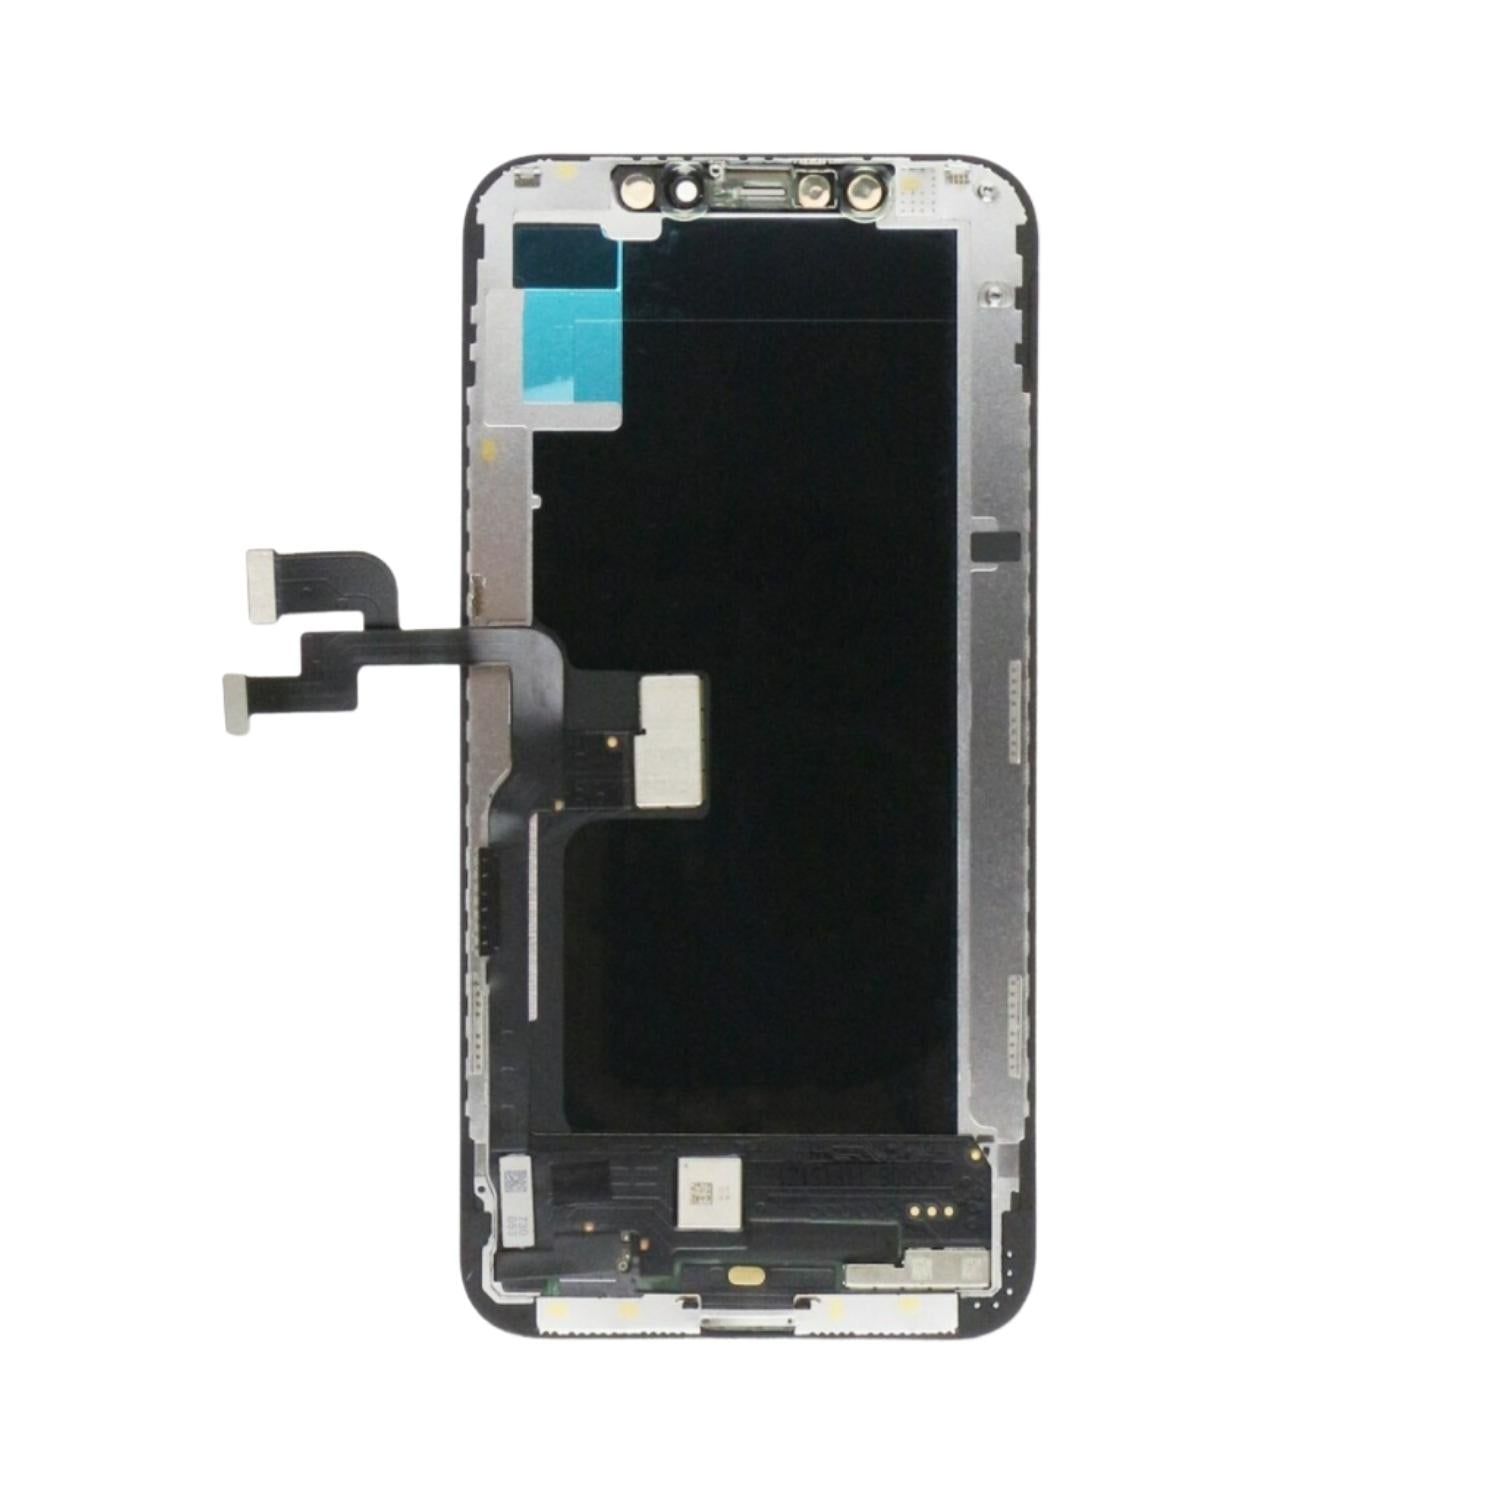 OLED and Digitizer Assembly for iPhone XS (OLED Soft) (Breakage Coverage)